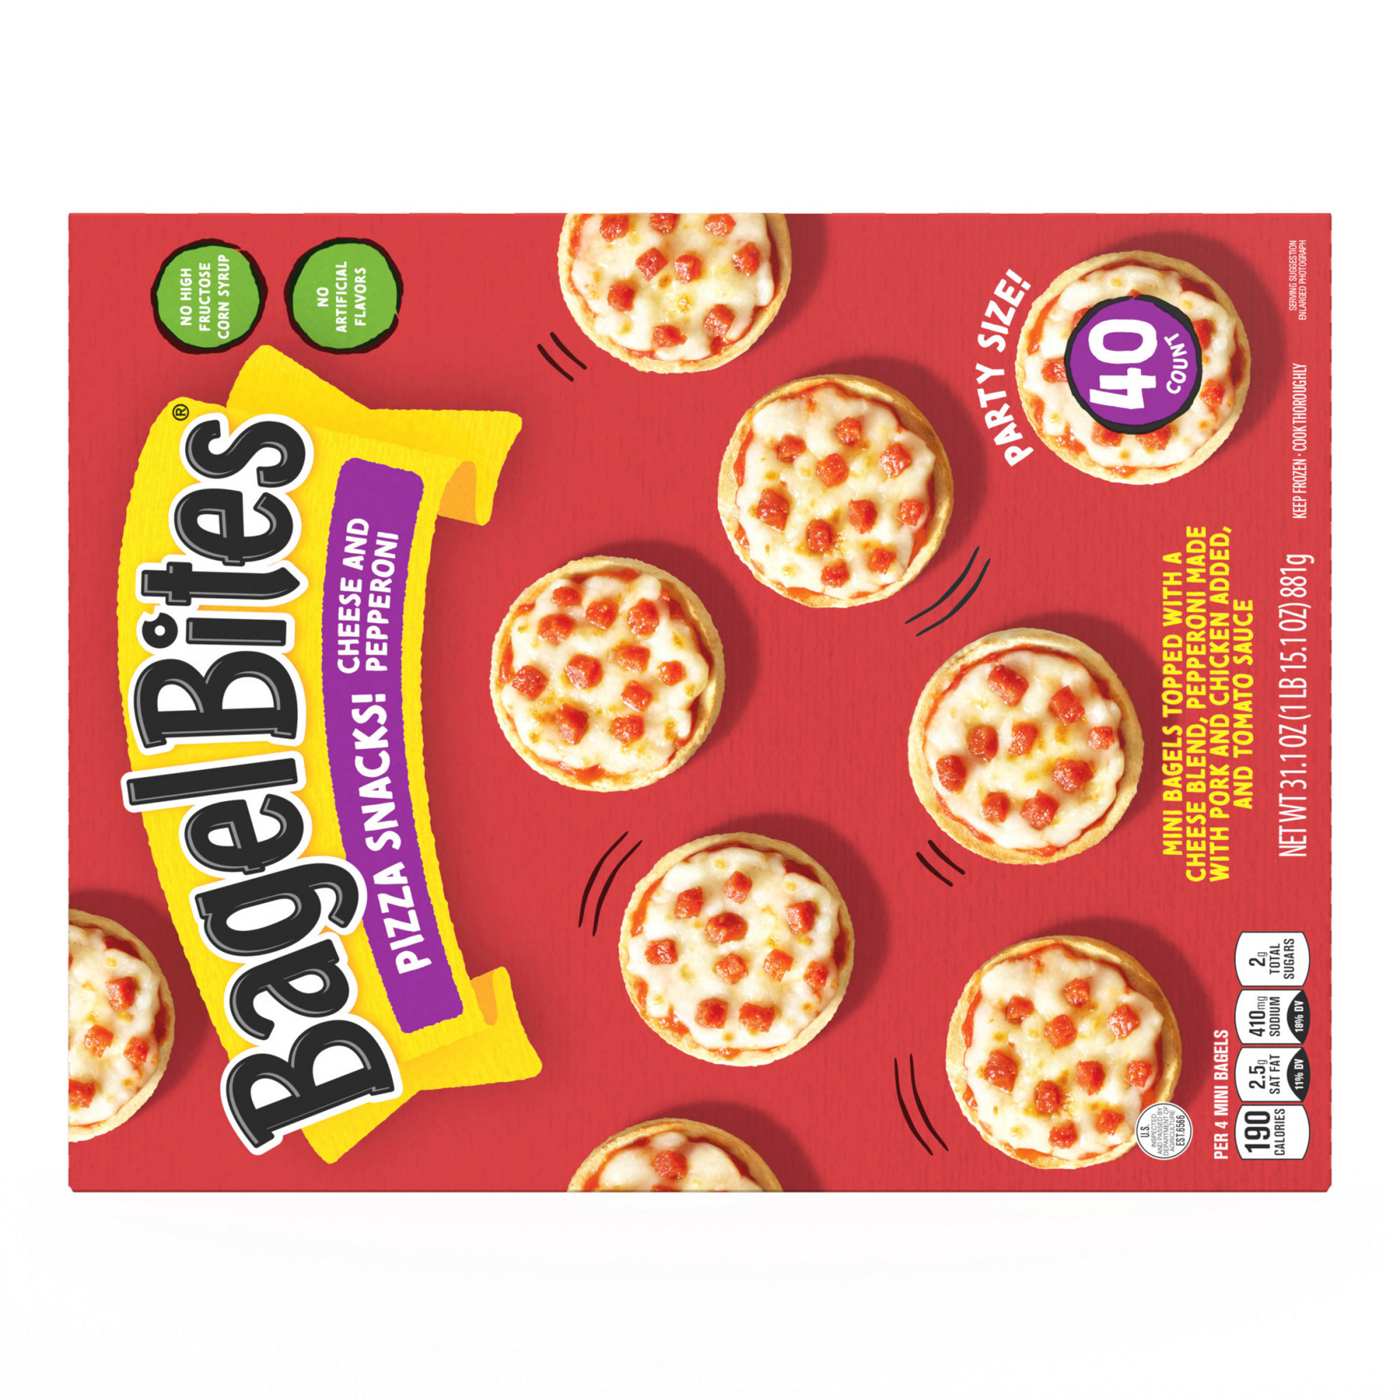 Bagel Bites Frozen Cheese & Pepperoni Pizza Snacks - Party Size; image 2 of 9